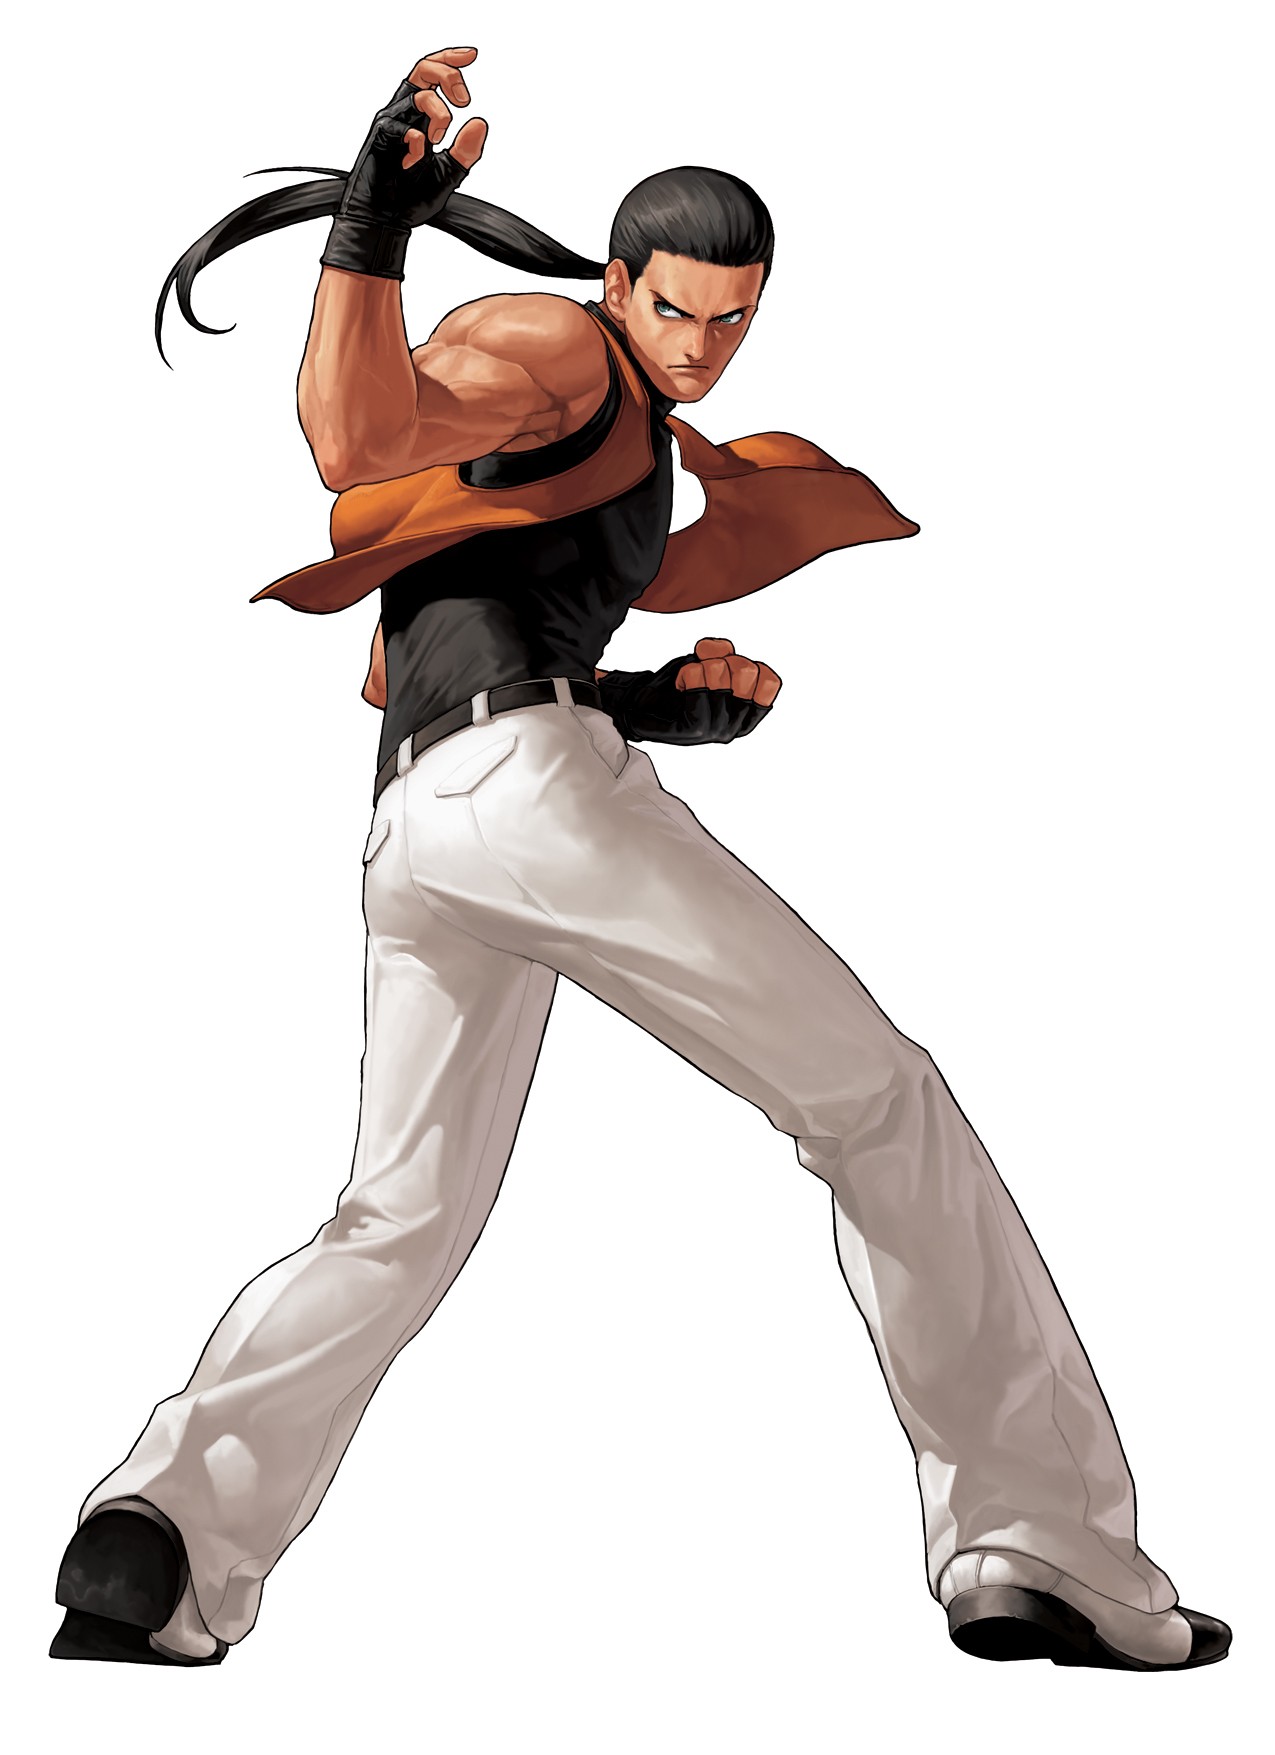 The King of Fighters XII - TFG Review / Art Gallery